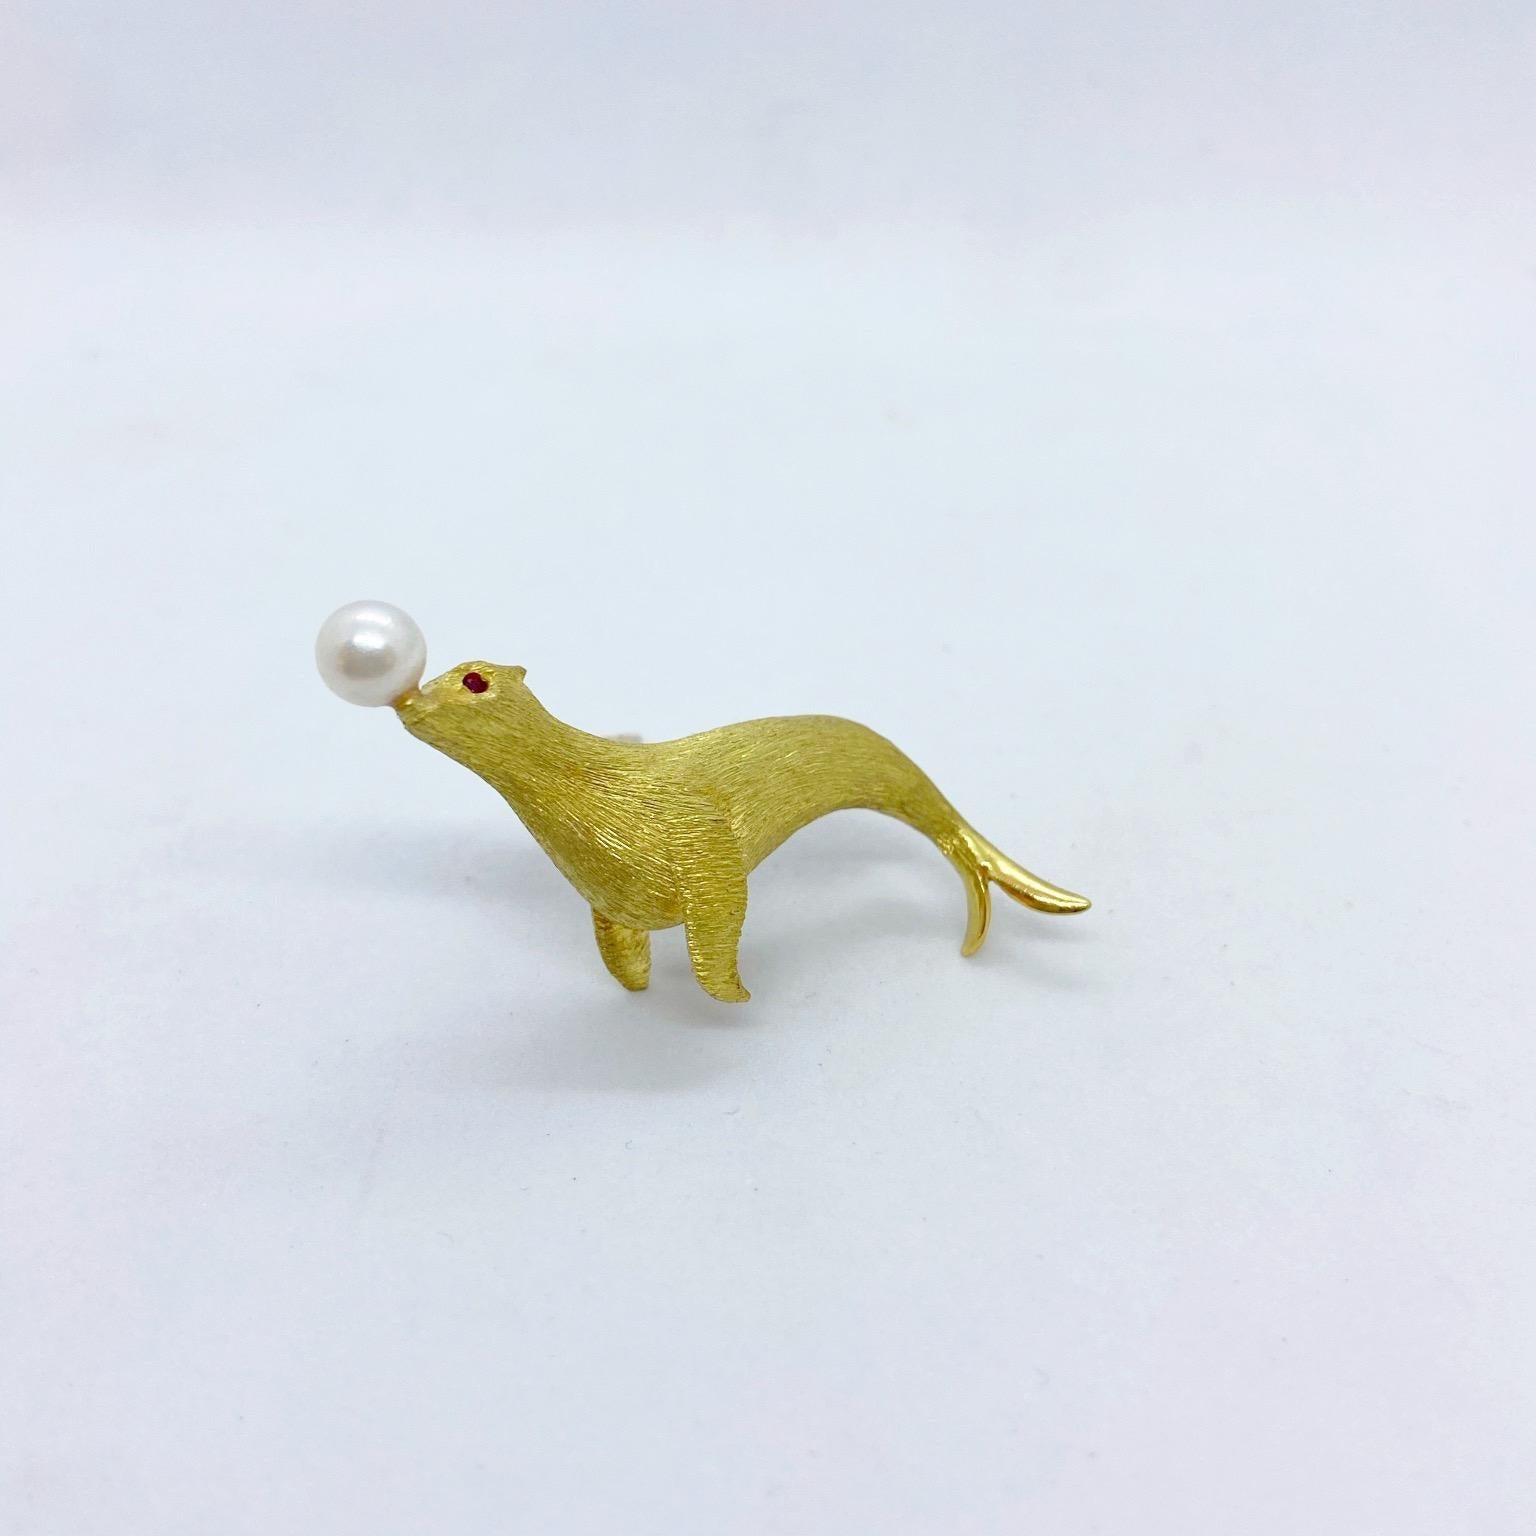 This 18 karat yellow gold brooch is designed as an adorable seal balancing a pearl ball on his nose. the brooch is in a sandblasted finish with ruby eyes. The brooch measures 2